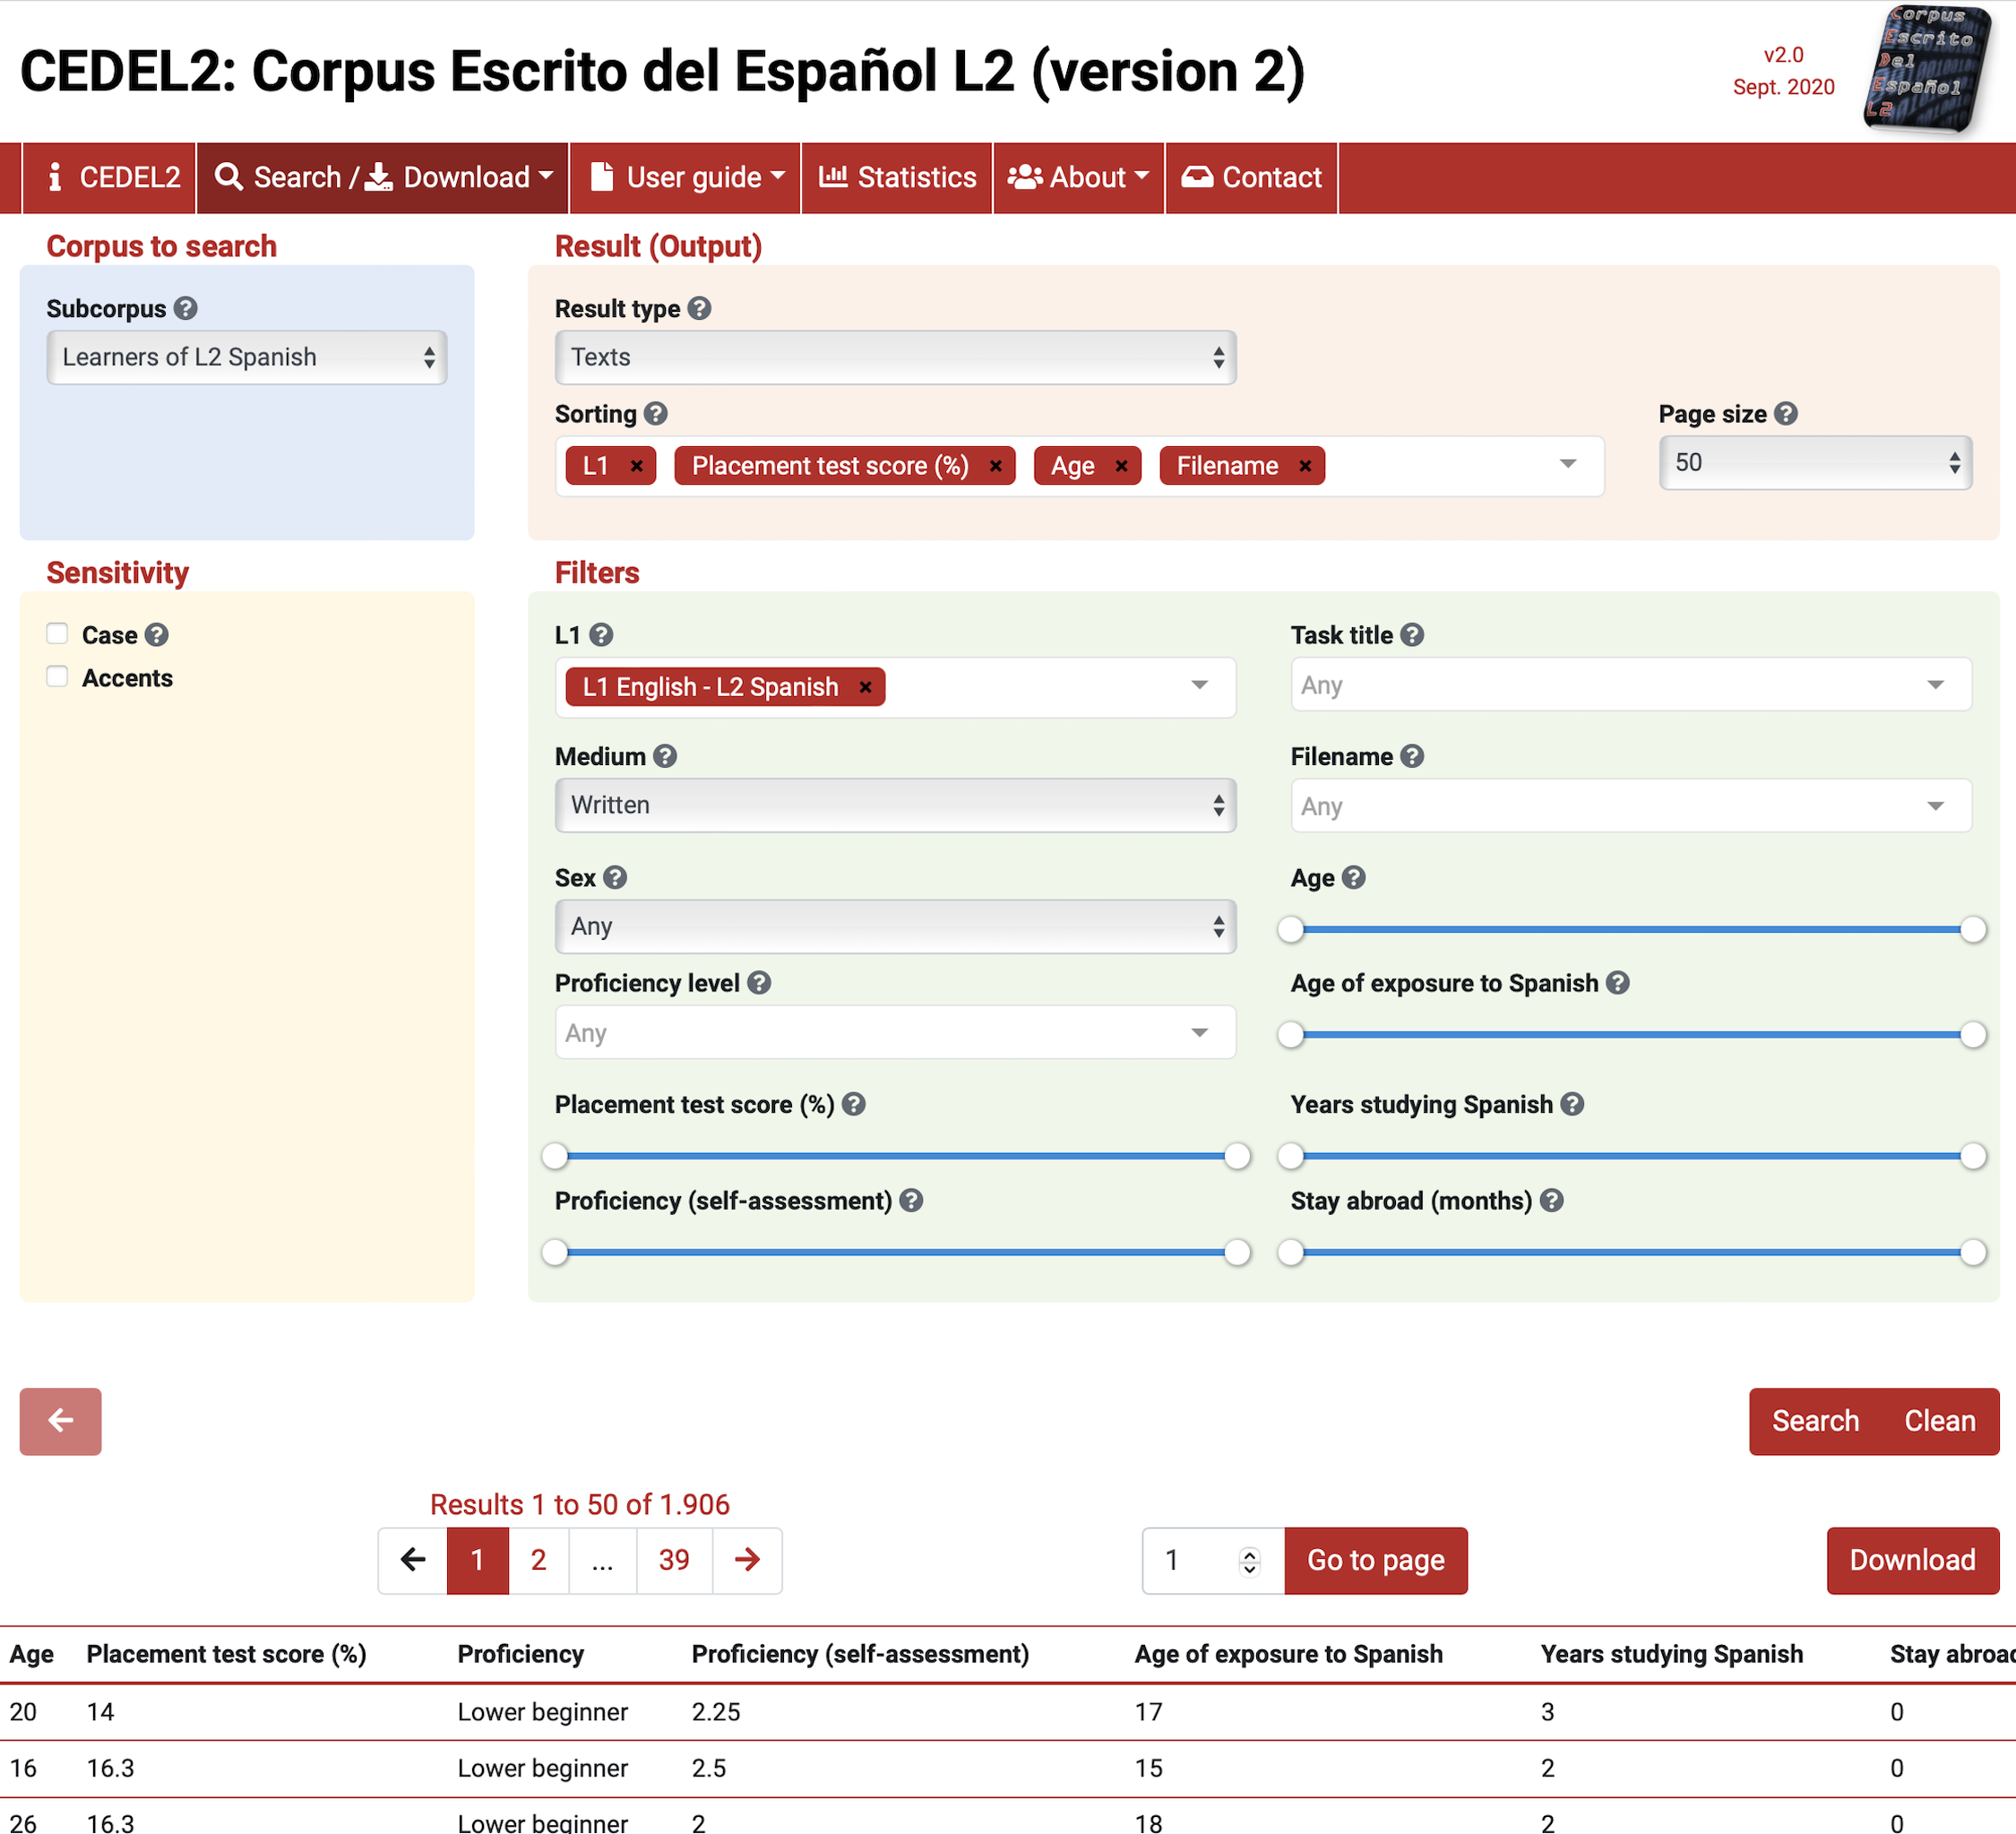 A view of the CEDEL2 Corpus search results. The results are displayed in a table with columns for the title, author, language, medium, and download. The download link is active for the search criteria 'L1 English - L2 Spanish'.